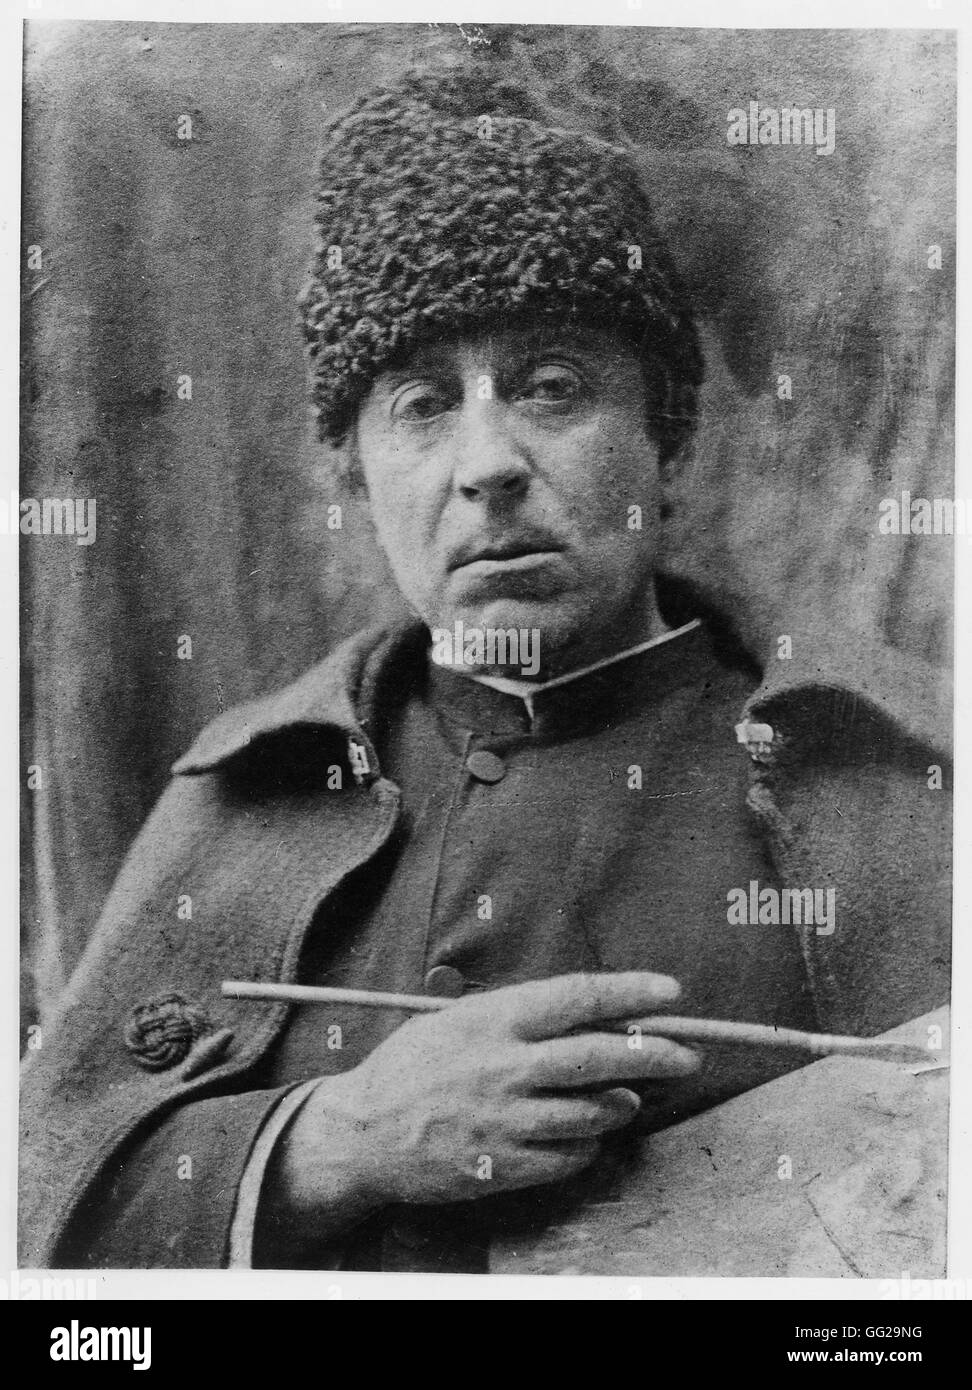 Gauguin (1848-1903), in 1893, when he met Maufra at the Bateau-Lavoir Stock Photo